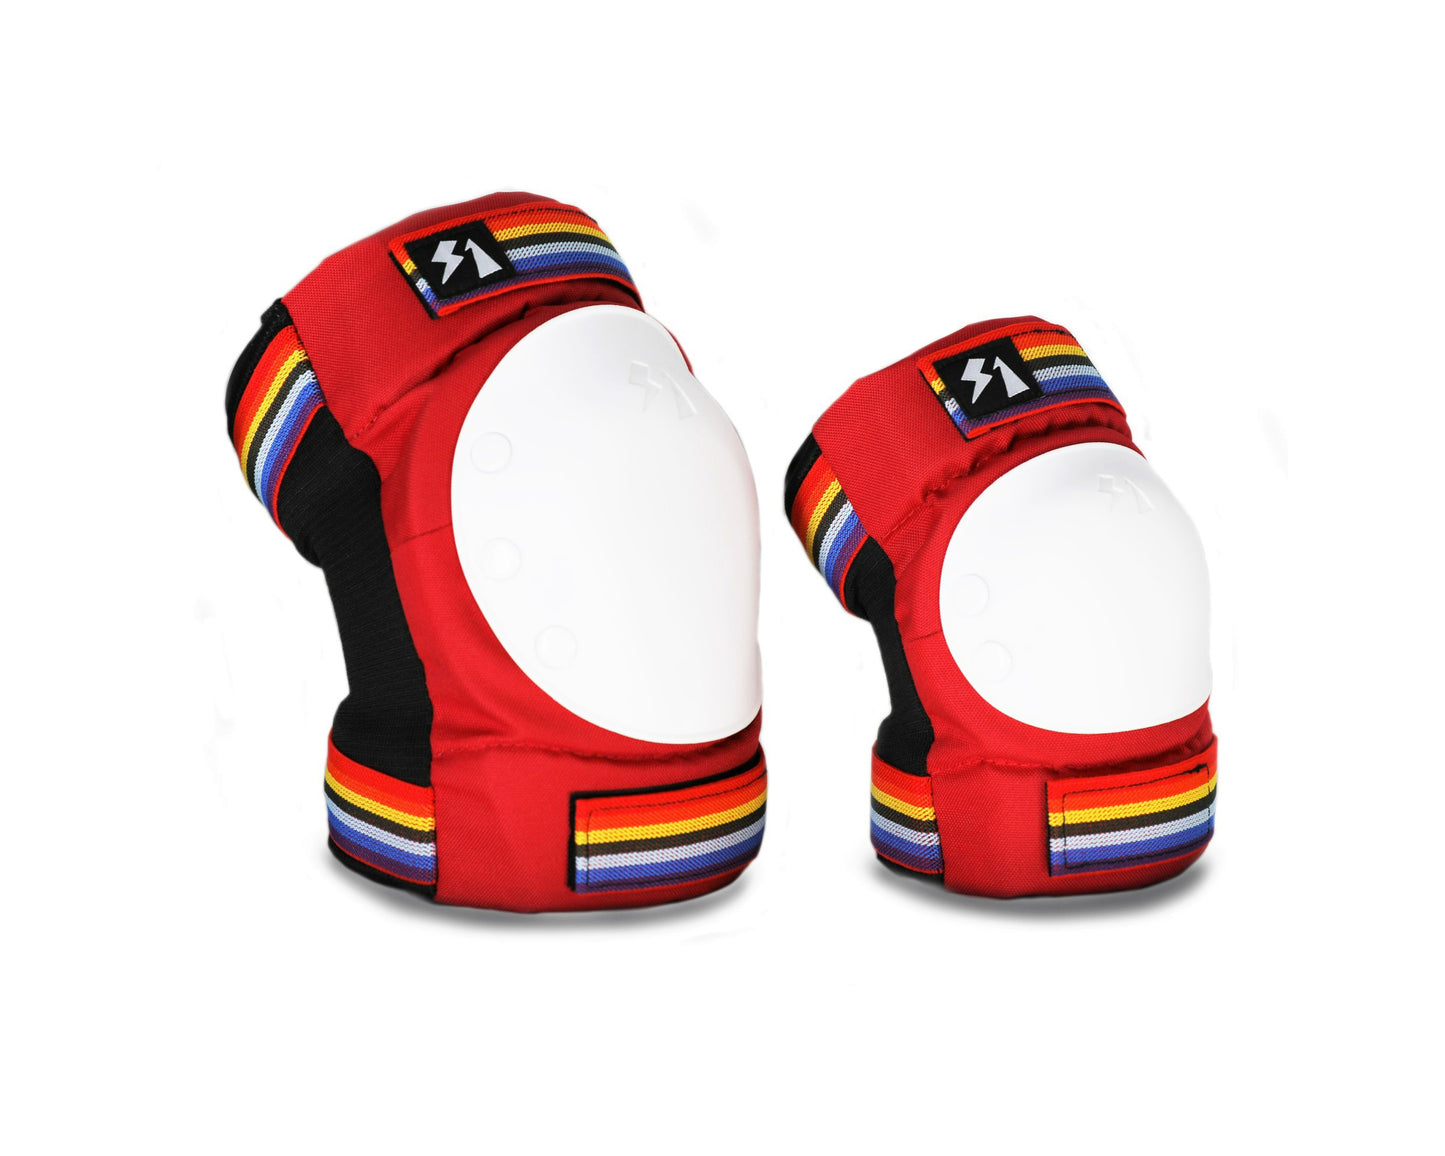 S1 Park Knee and Elbow Pad Sets - Retro